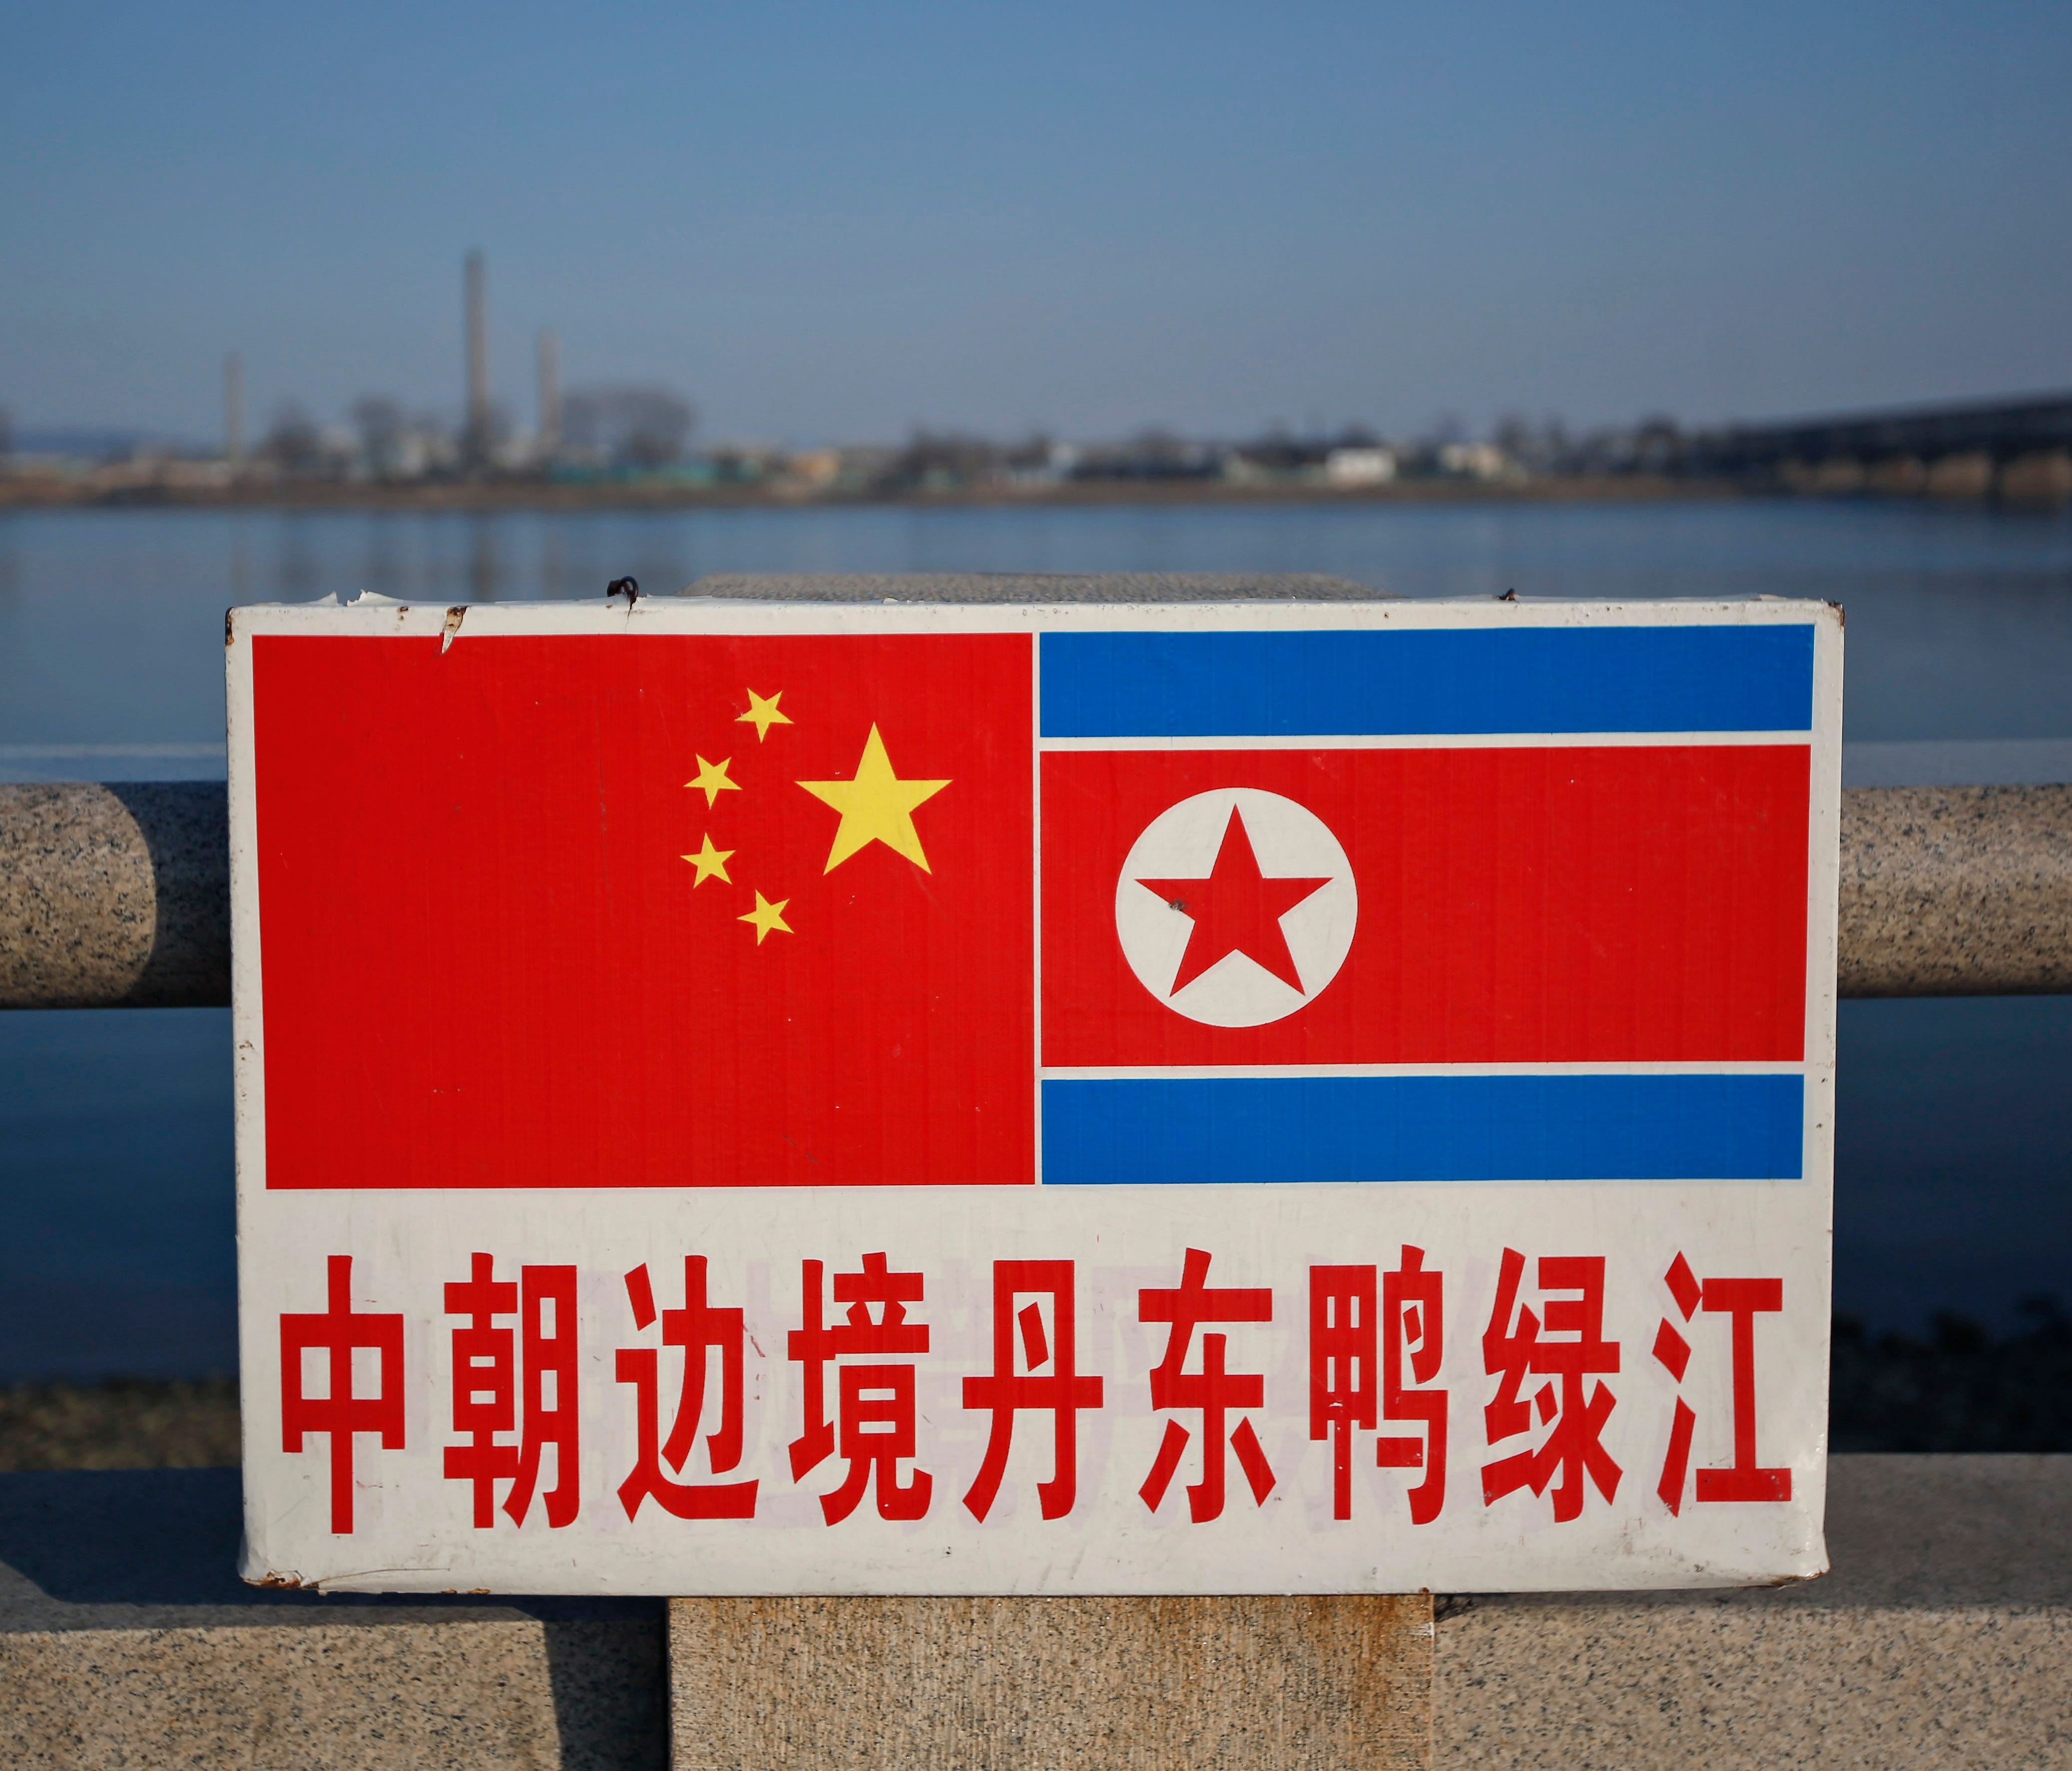 The Chinese and North Korean national flags are seen on a sign along the Yalu River where across is the North Korean town of Sinuiju in Dandong, Liaoning Province, China, April 7,  2013 (reissued Sept. 29, 2017).